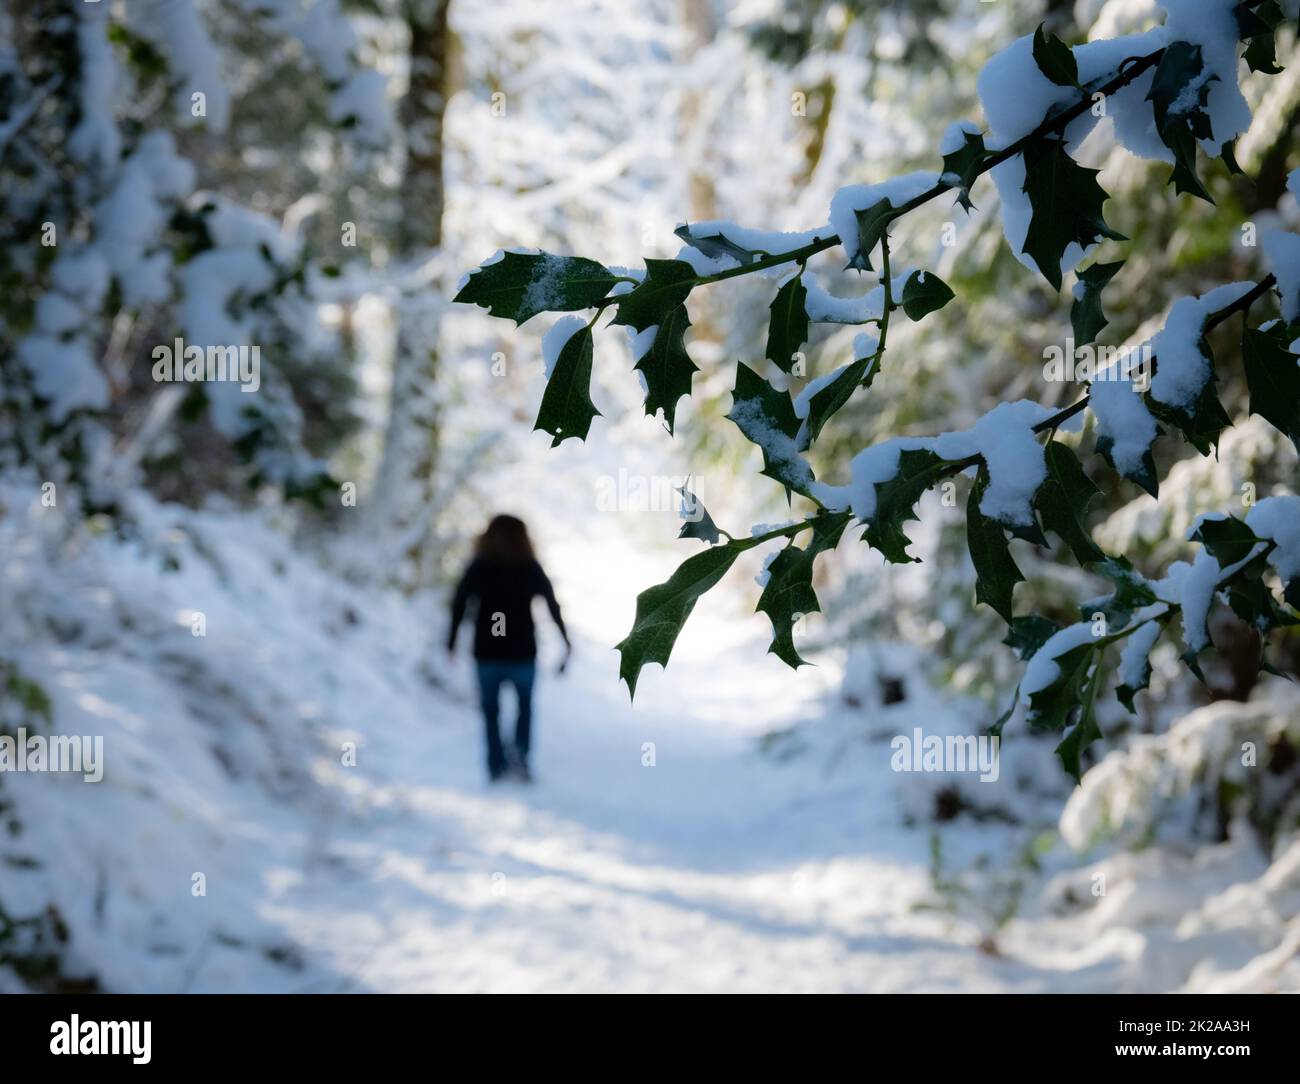 Woman walking down a snowy forest path in winter with holly leaves in the foreground Stock Photo